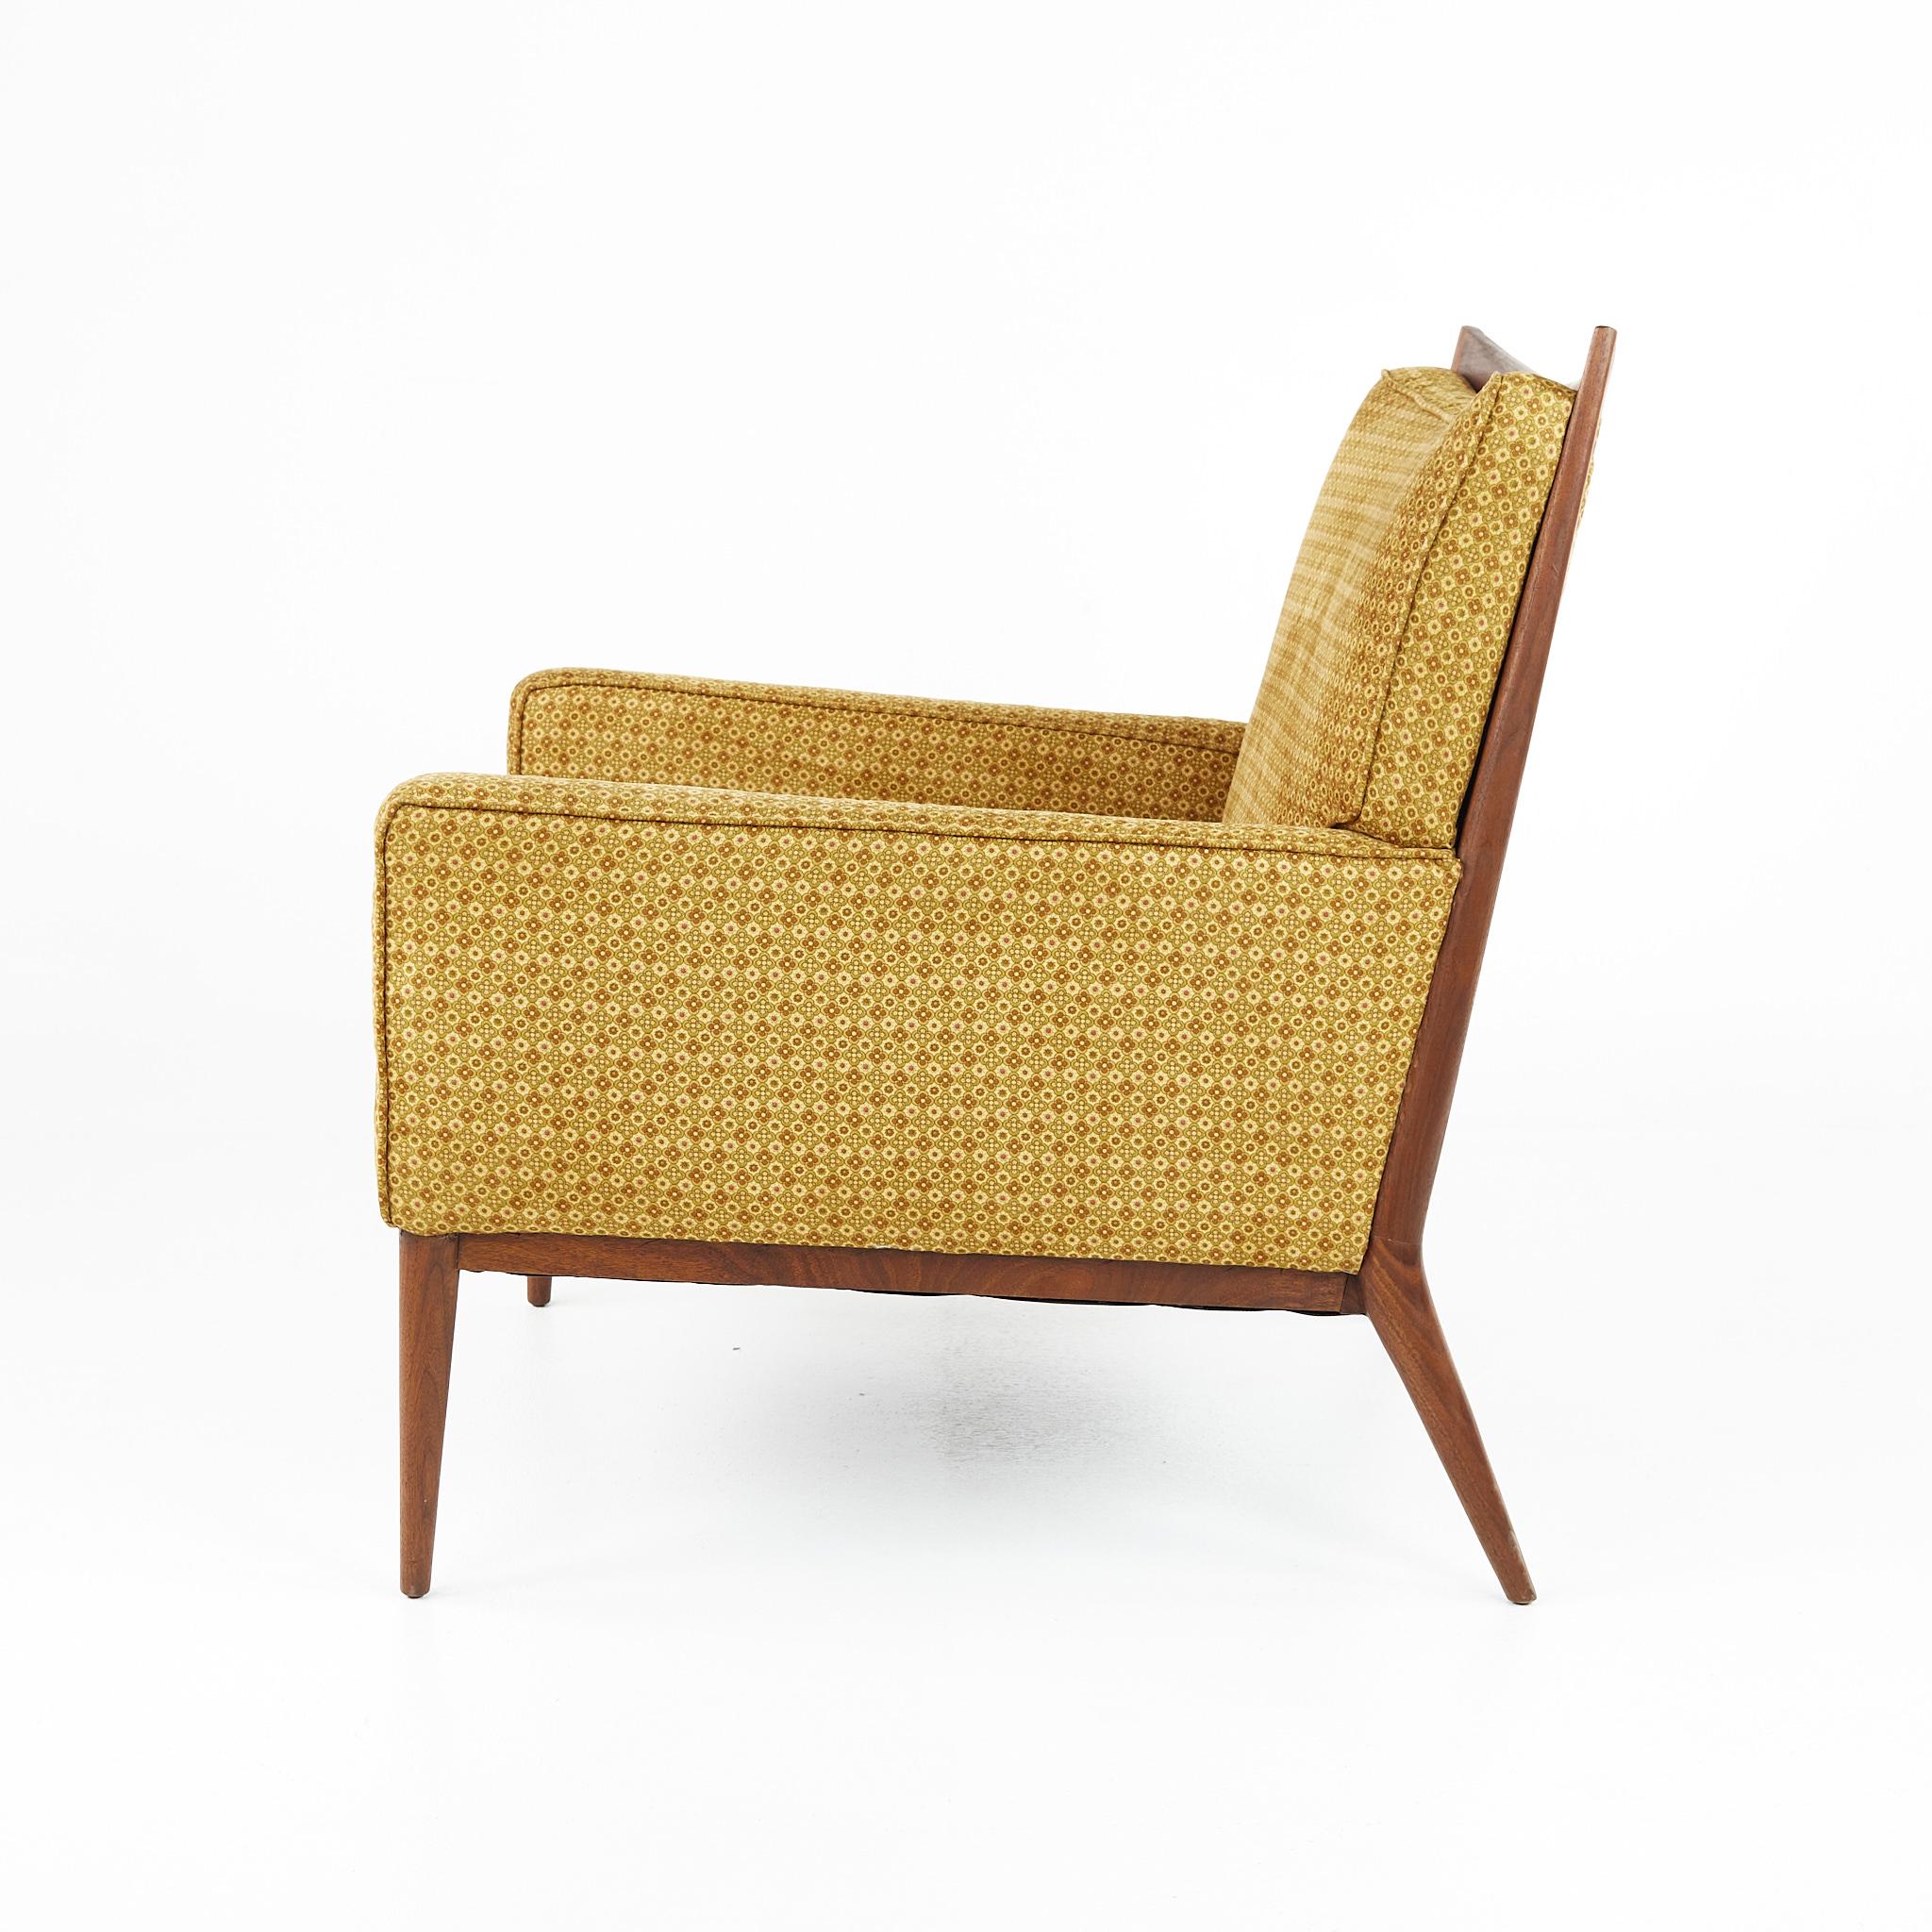 American Paul McCobb for Directional Mid Century Lounge Chair